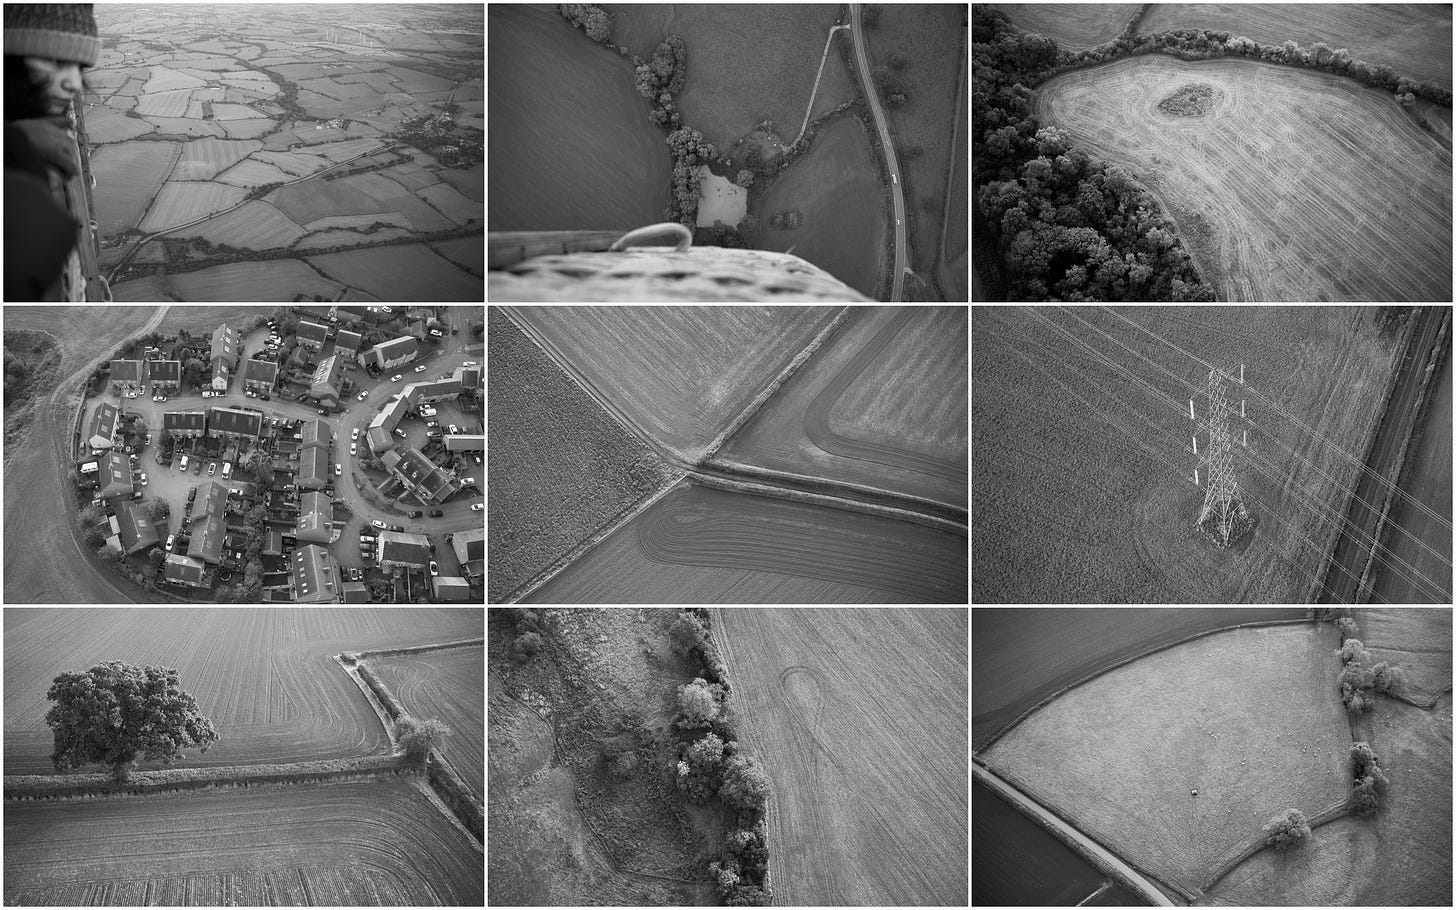 Some photos taken from a hot air balloon. They are the same as the ones up top but I prefer them in B&W